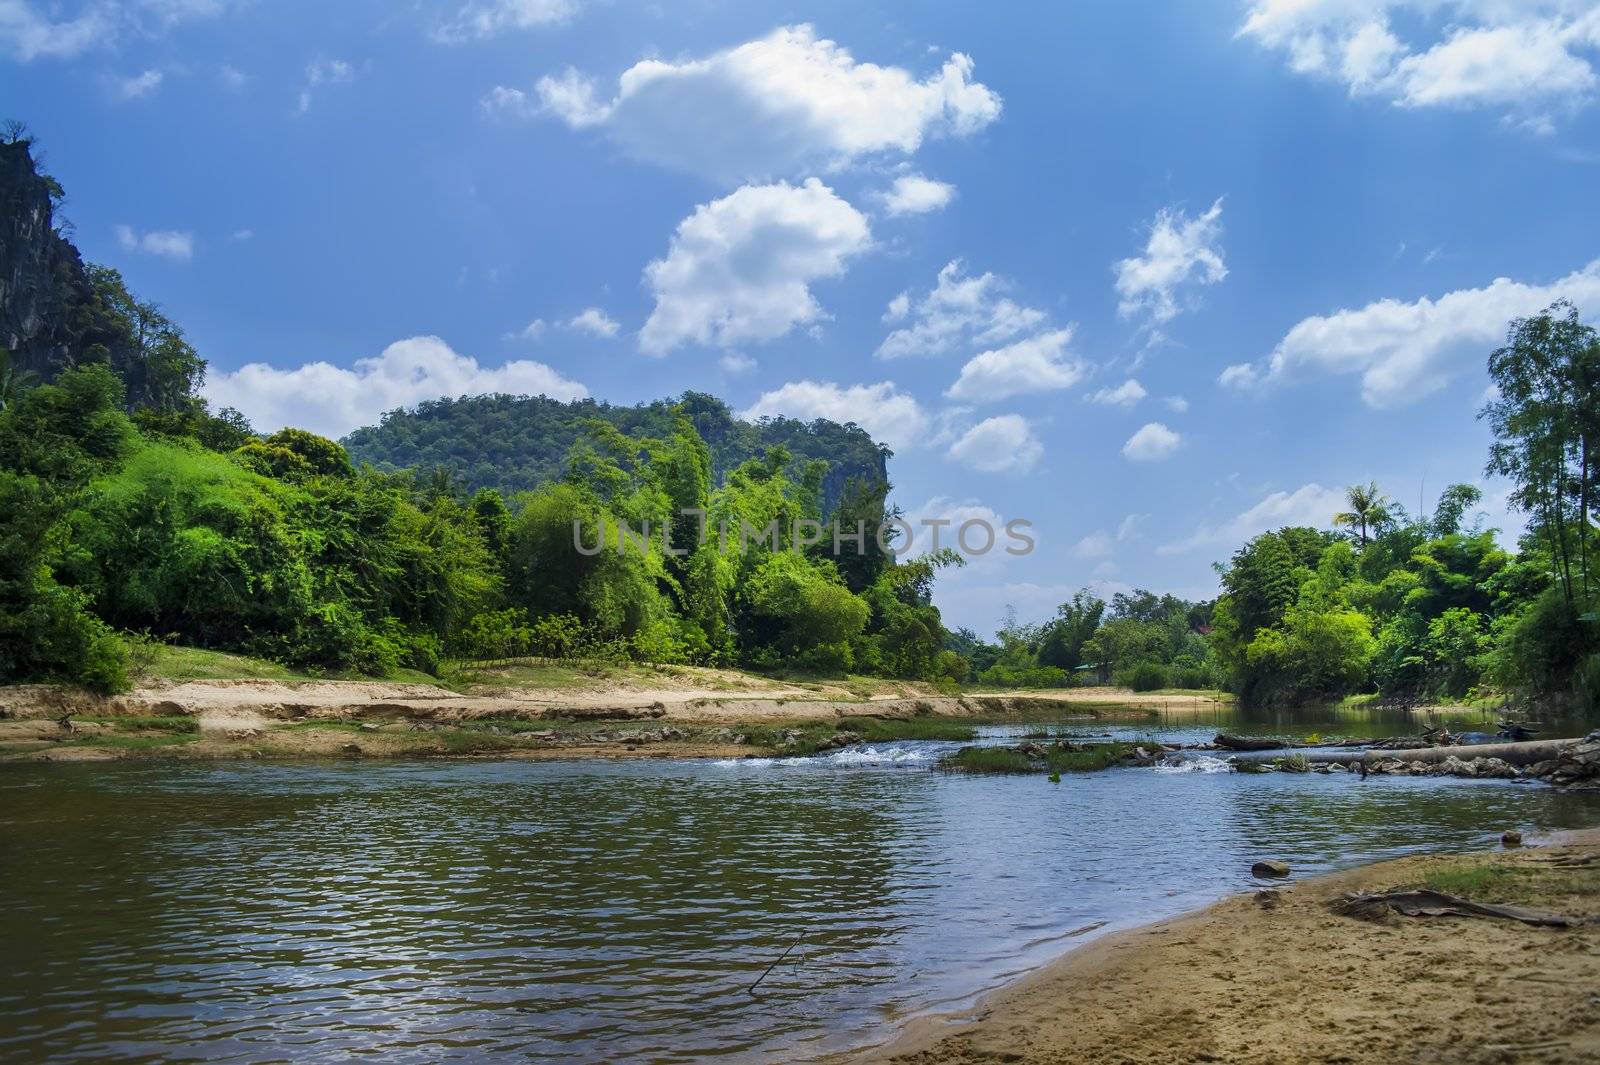 River is located 8 km northeast of Thakhek near Tham Xang Cave.